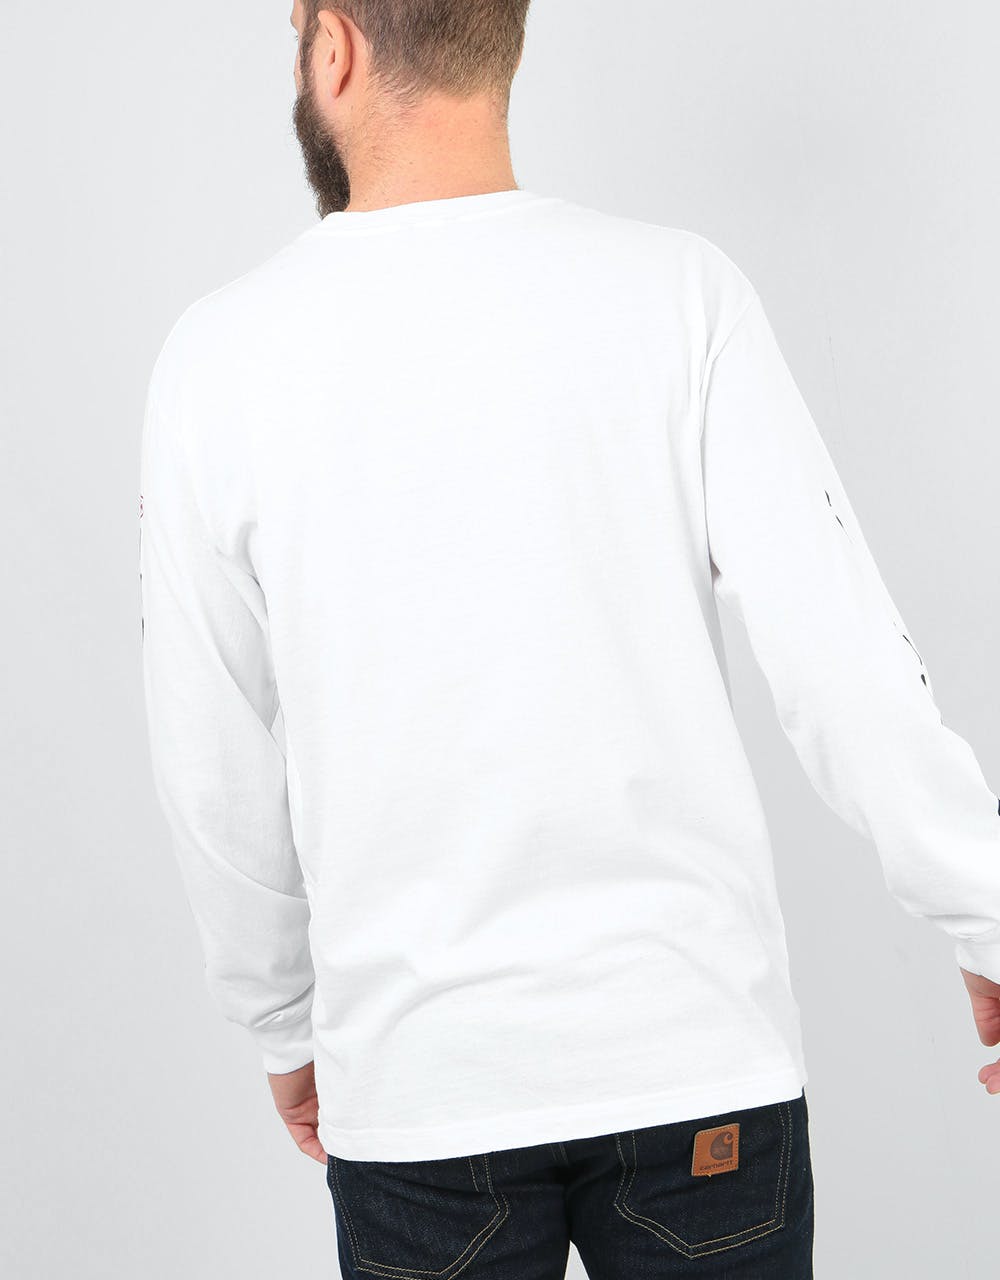 Brixton x Independent Frame L/S T-Shirt - White